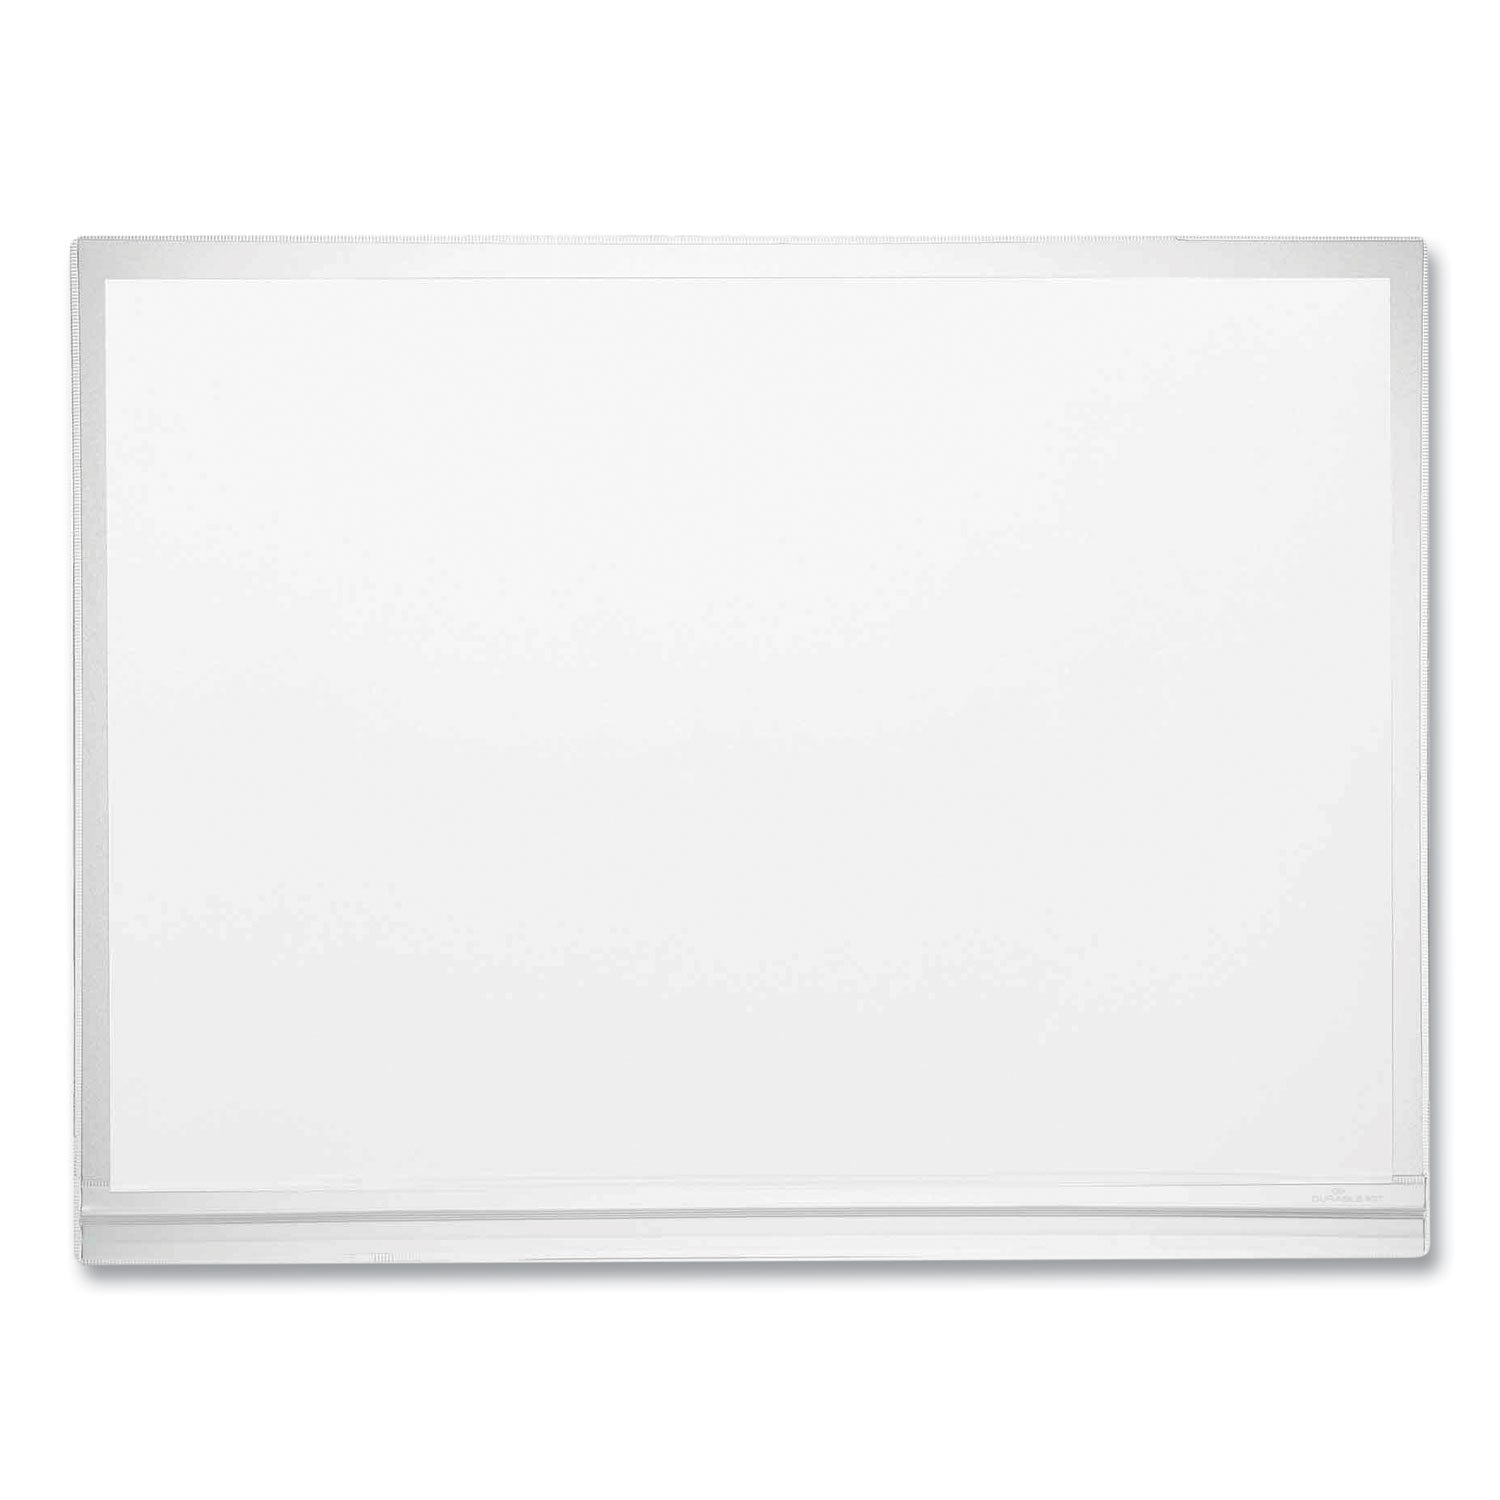 self-adhesive-water-resistant-sign-holder-11-x-17-clear-frame-5-pack_dbl501719 - 5